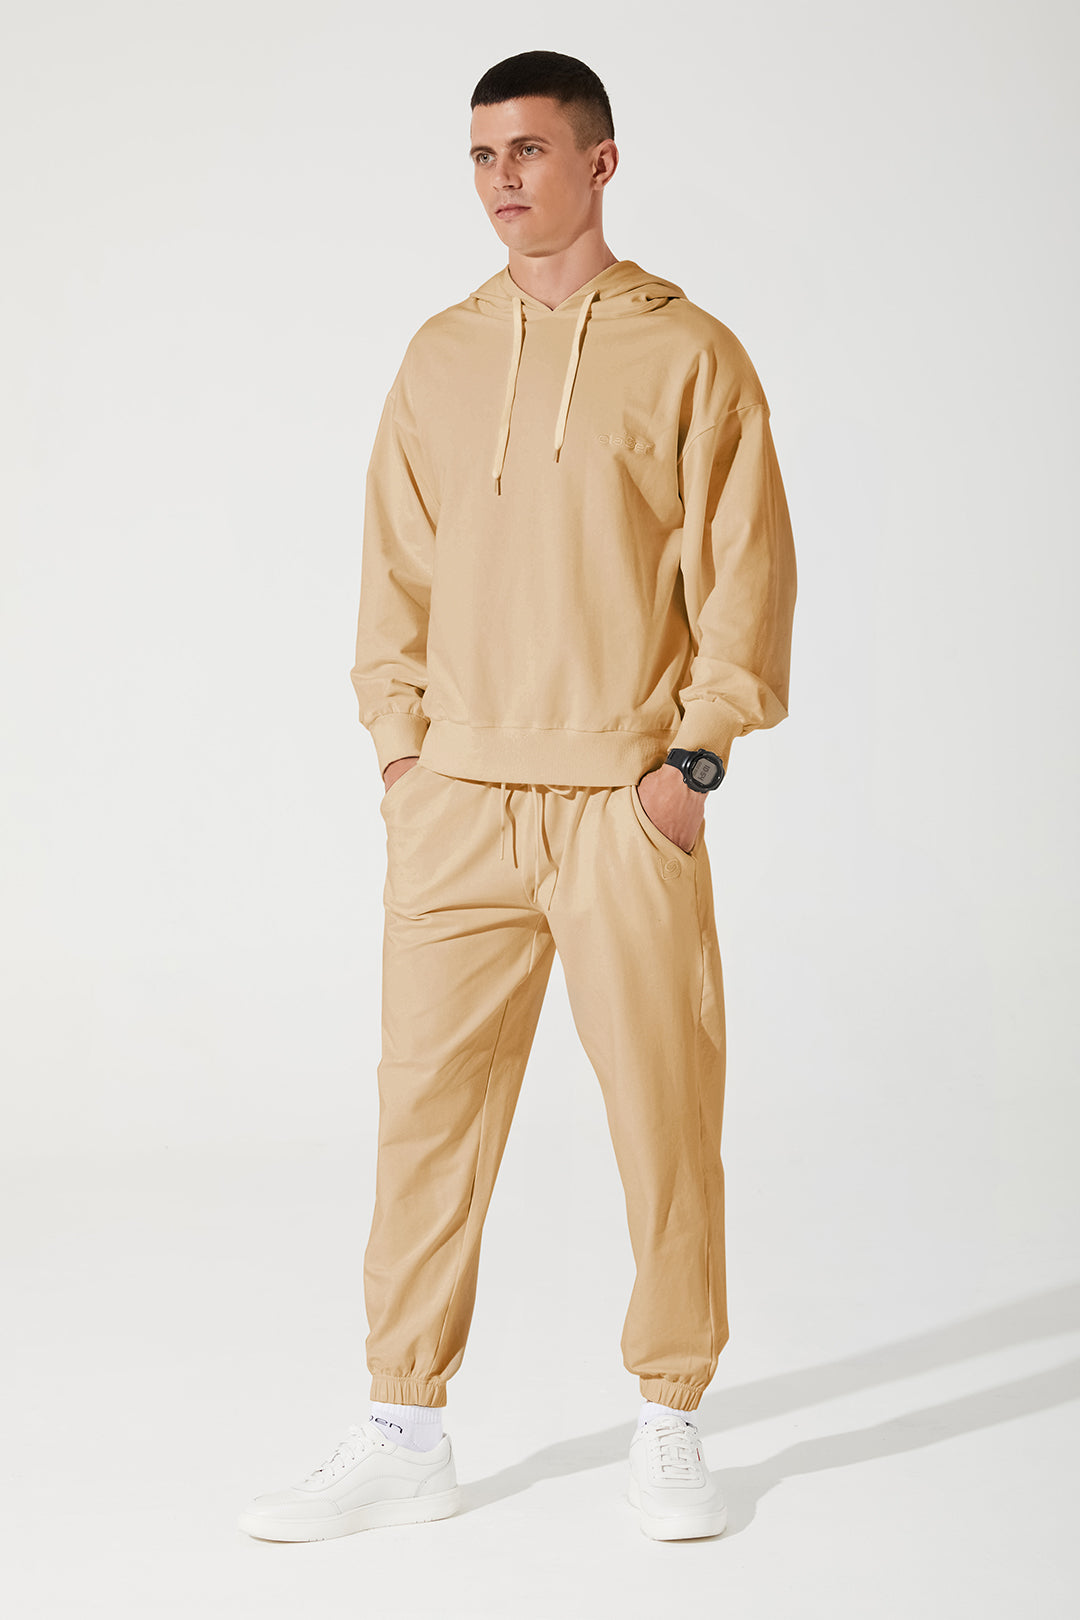 Stylish men's cappuccino beige hoodie with a cropped design - OW-0033-MHO-BG_2.jpg